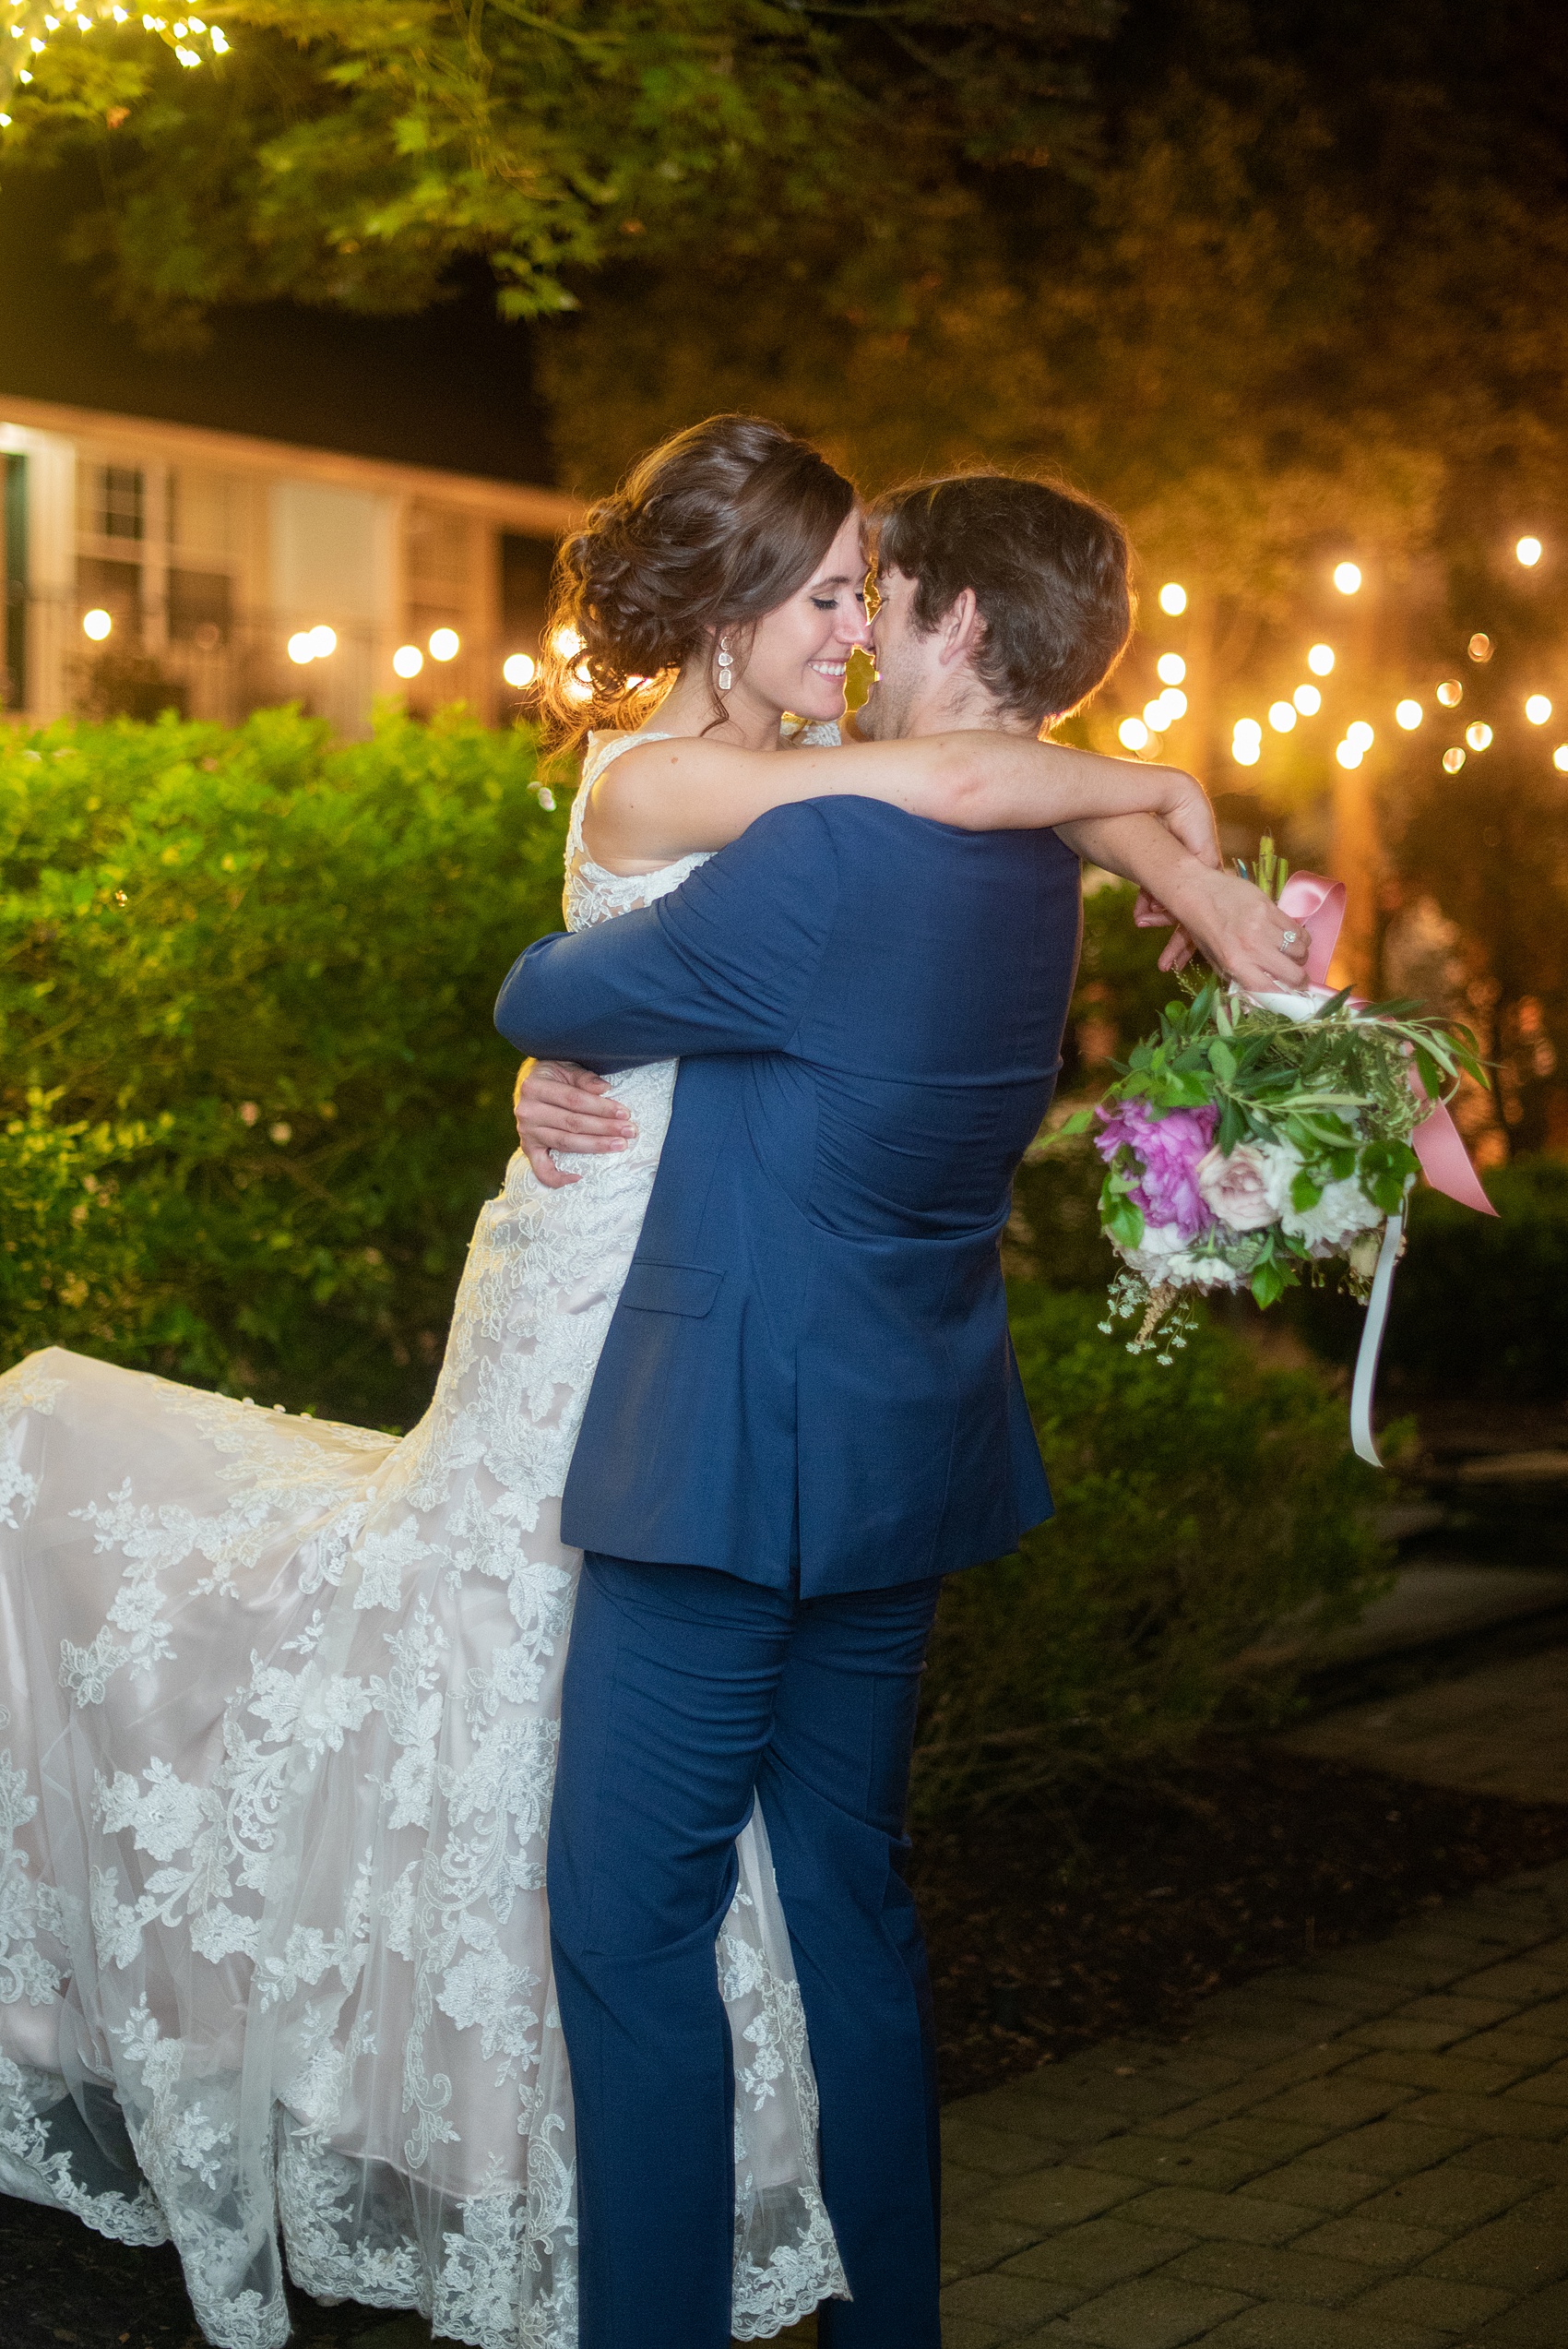 A June wedding at Olde Mill Inn, NJ. Photos by Mikkel Paige Photography for an event with pink details. This New Jersey venue is a great option for something not too far from NYC. The reception was filled with unique glass terrarium vases, colorful pink flowers and greenery, peonies and Midsummer Night’s Dream theme details. The bride and groom hugged outside towards the end of their reception, under the hanging bistro lights. Click through for their complete wedding recap! #OldeMillInn #NJwedding #NJweddingphotographer #mikkelpaige #NewJerseyWeddingVenue #NewJerseyWedding #lastkiss #MidsummerNightsDream